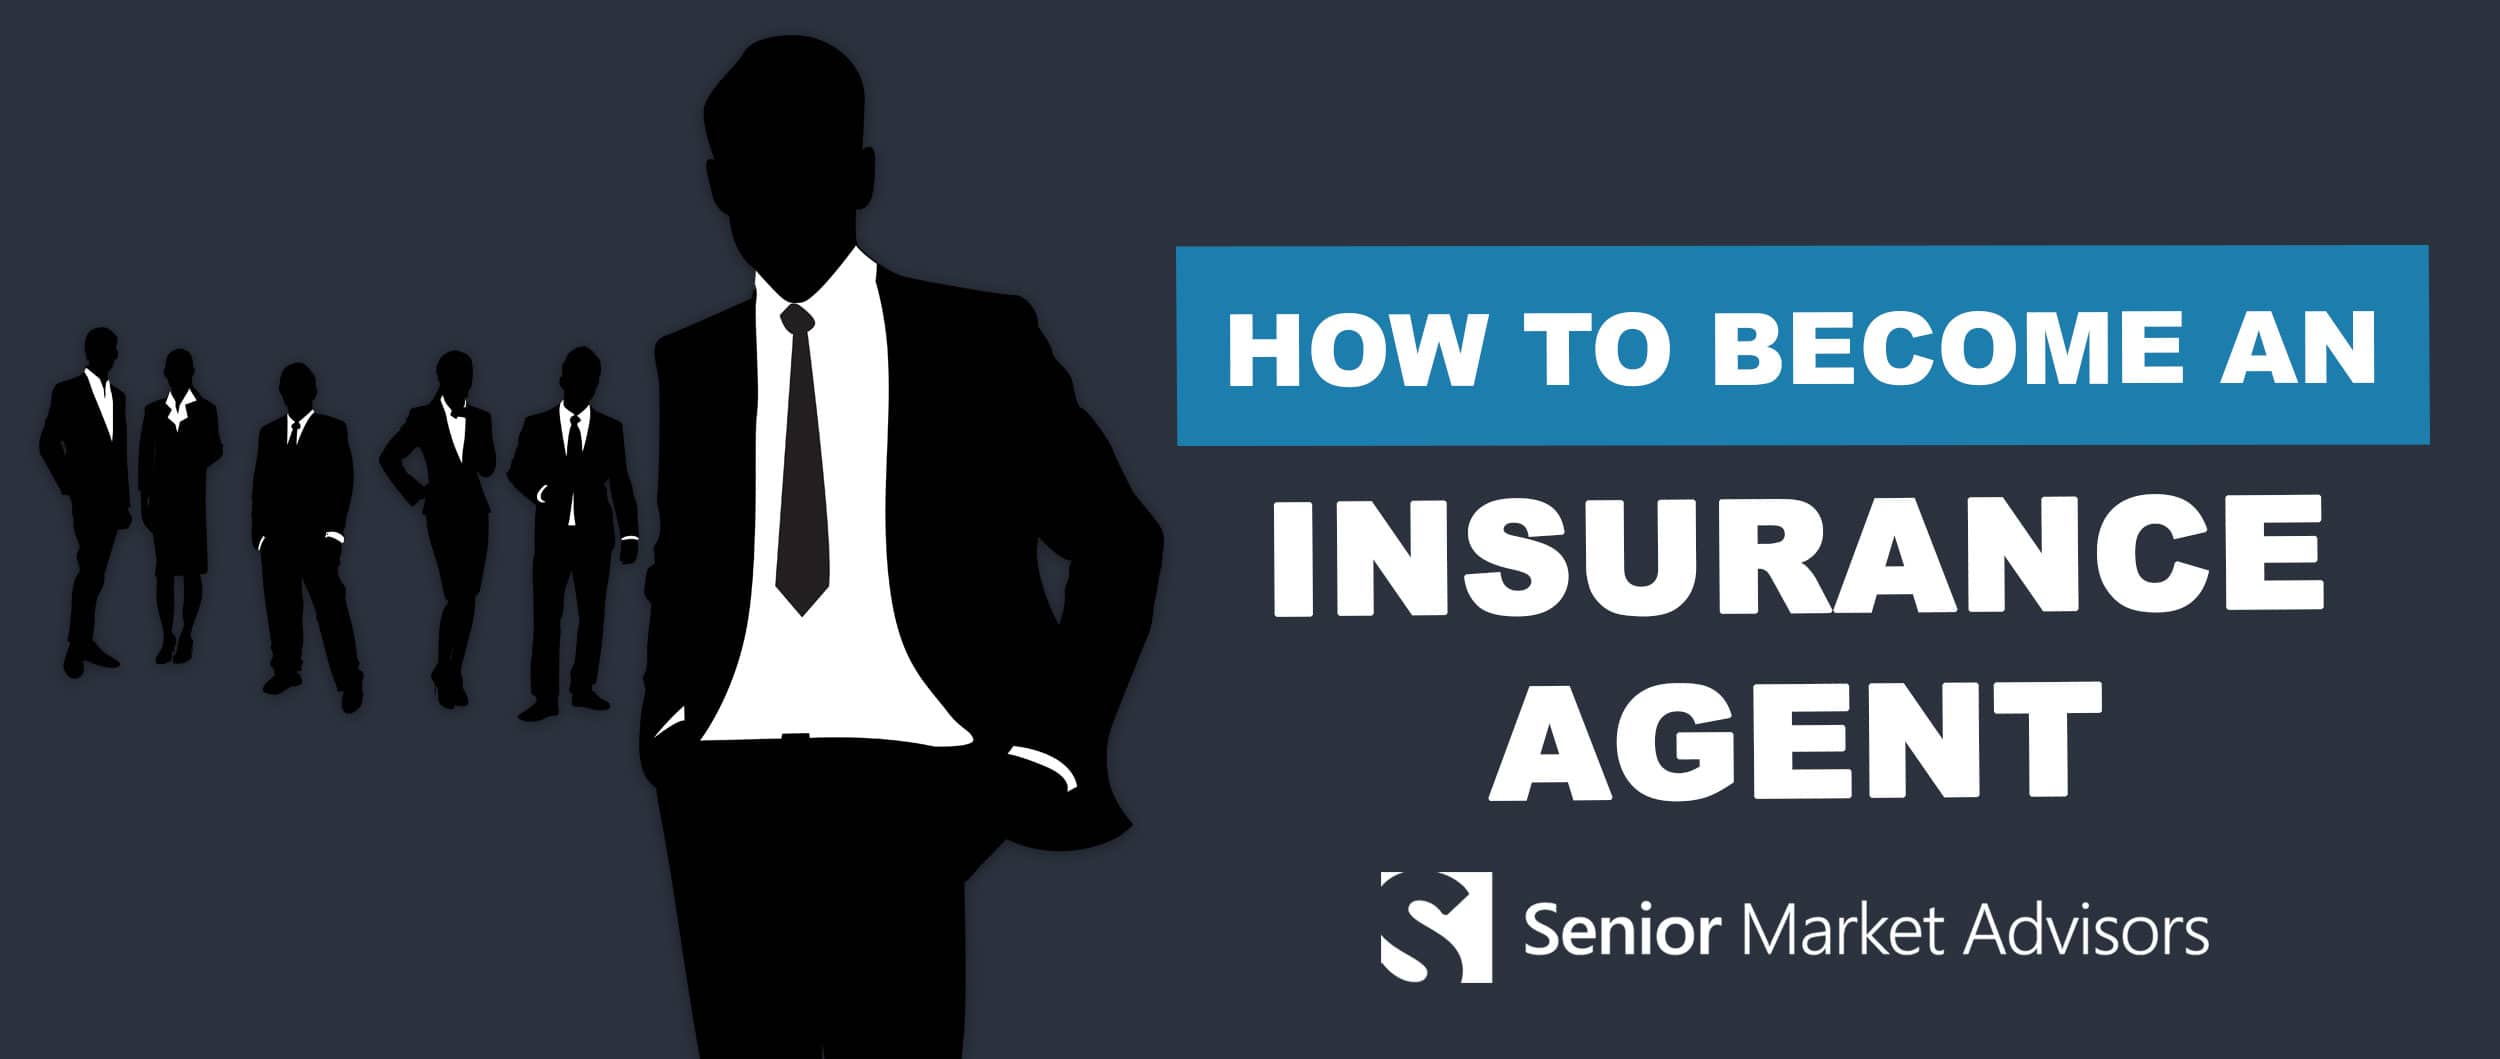 How To Become An Insurance Agent | Senior Market Advisors